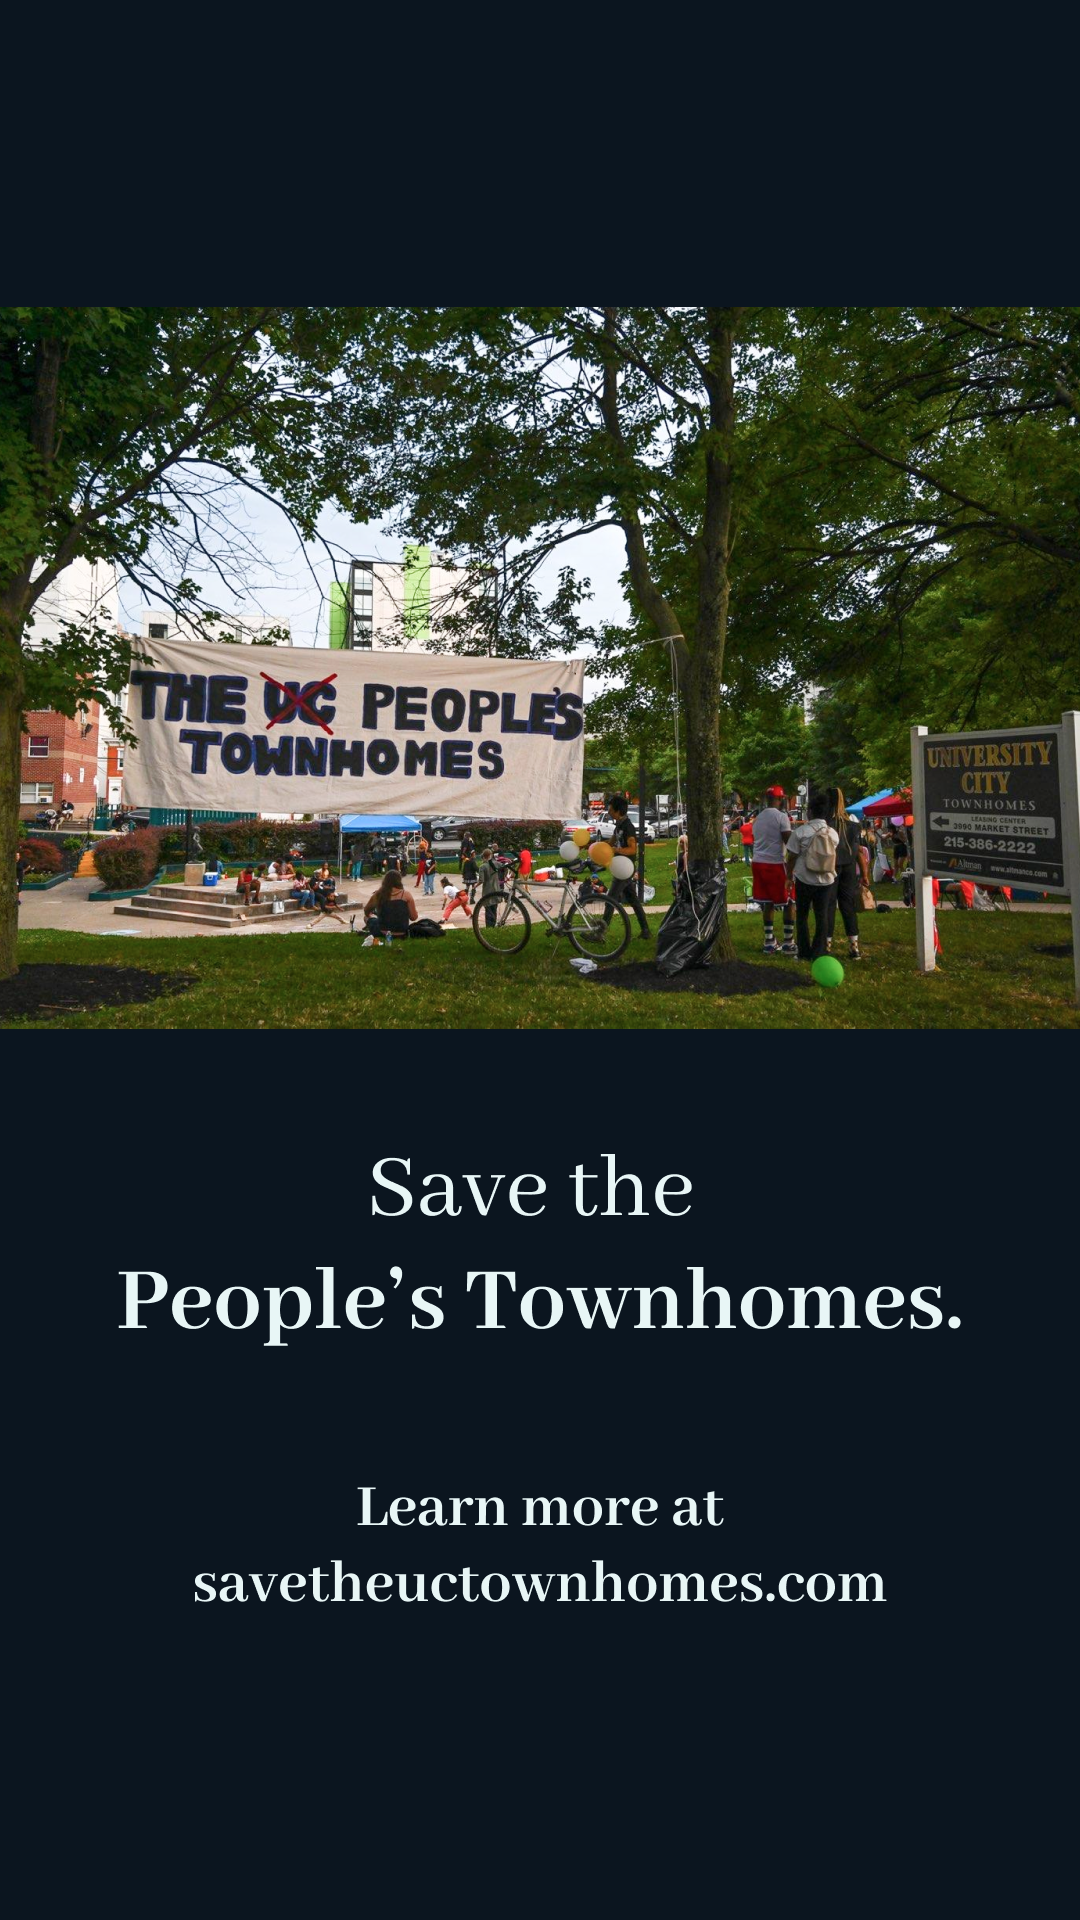 Photo of banner reading "Save the People's Townhomes" hanging in the plaza next to the UC Townhomes